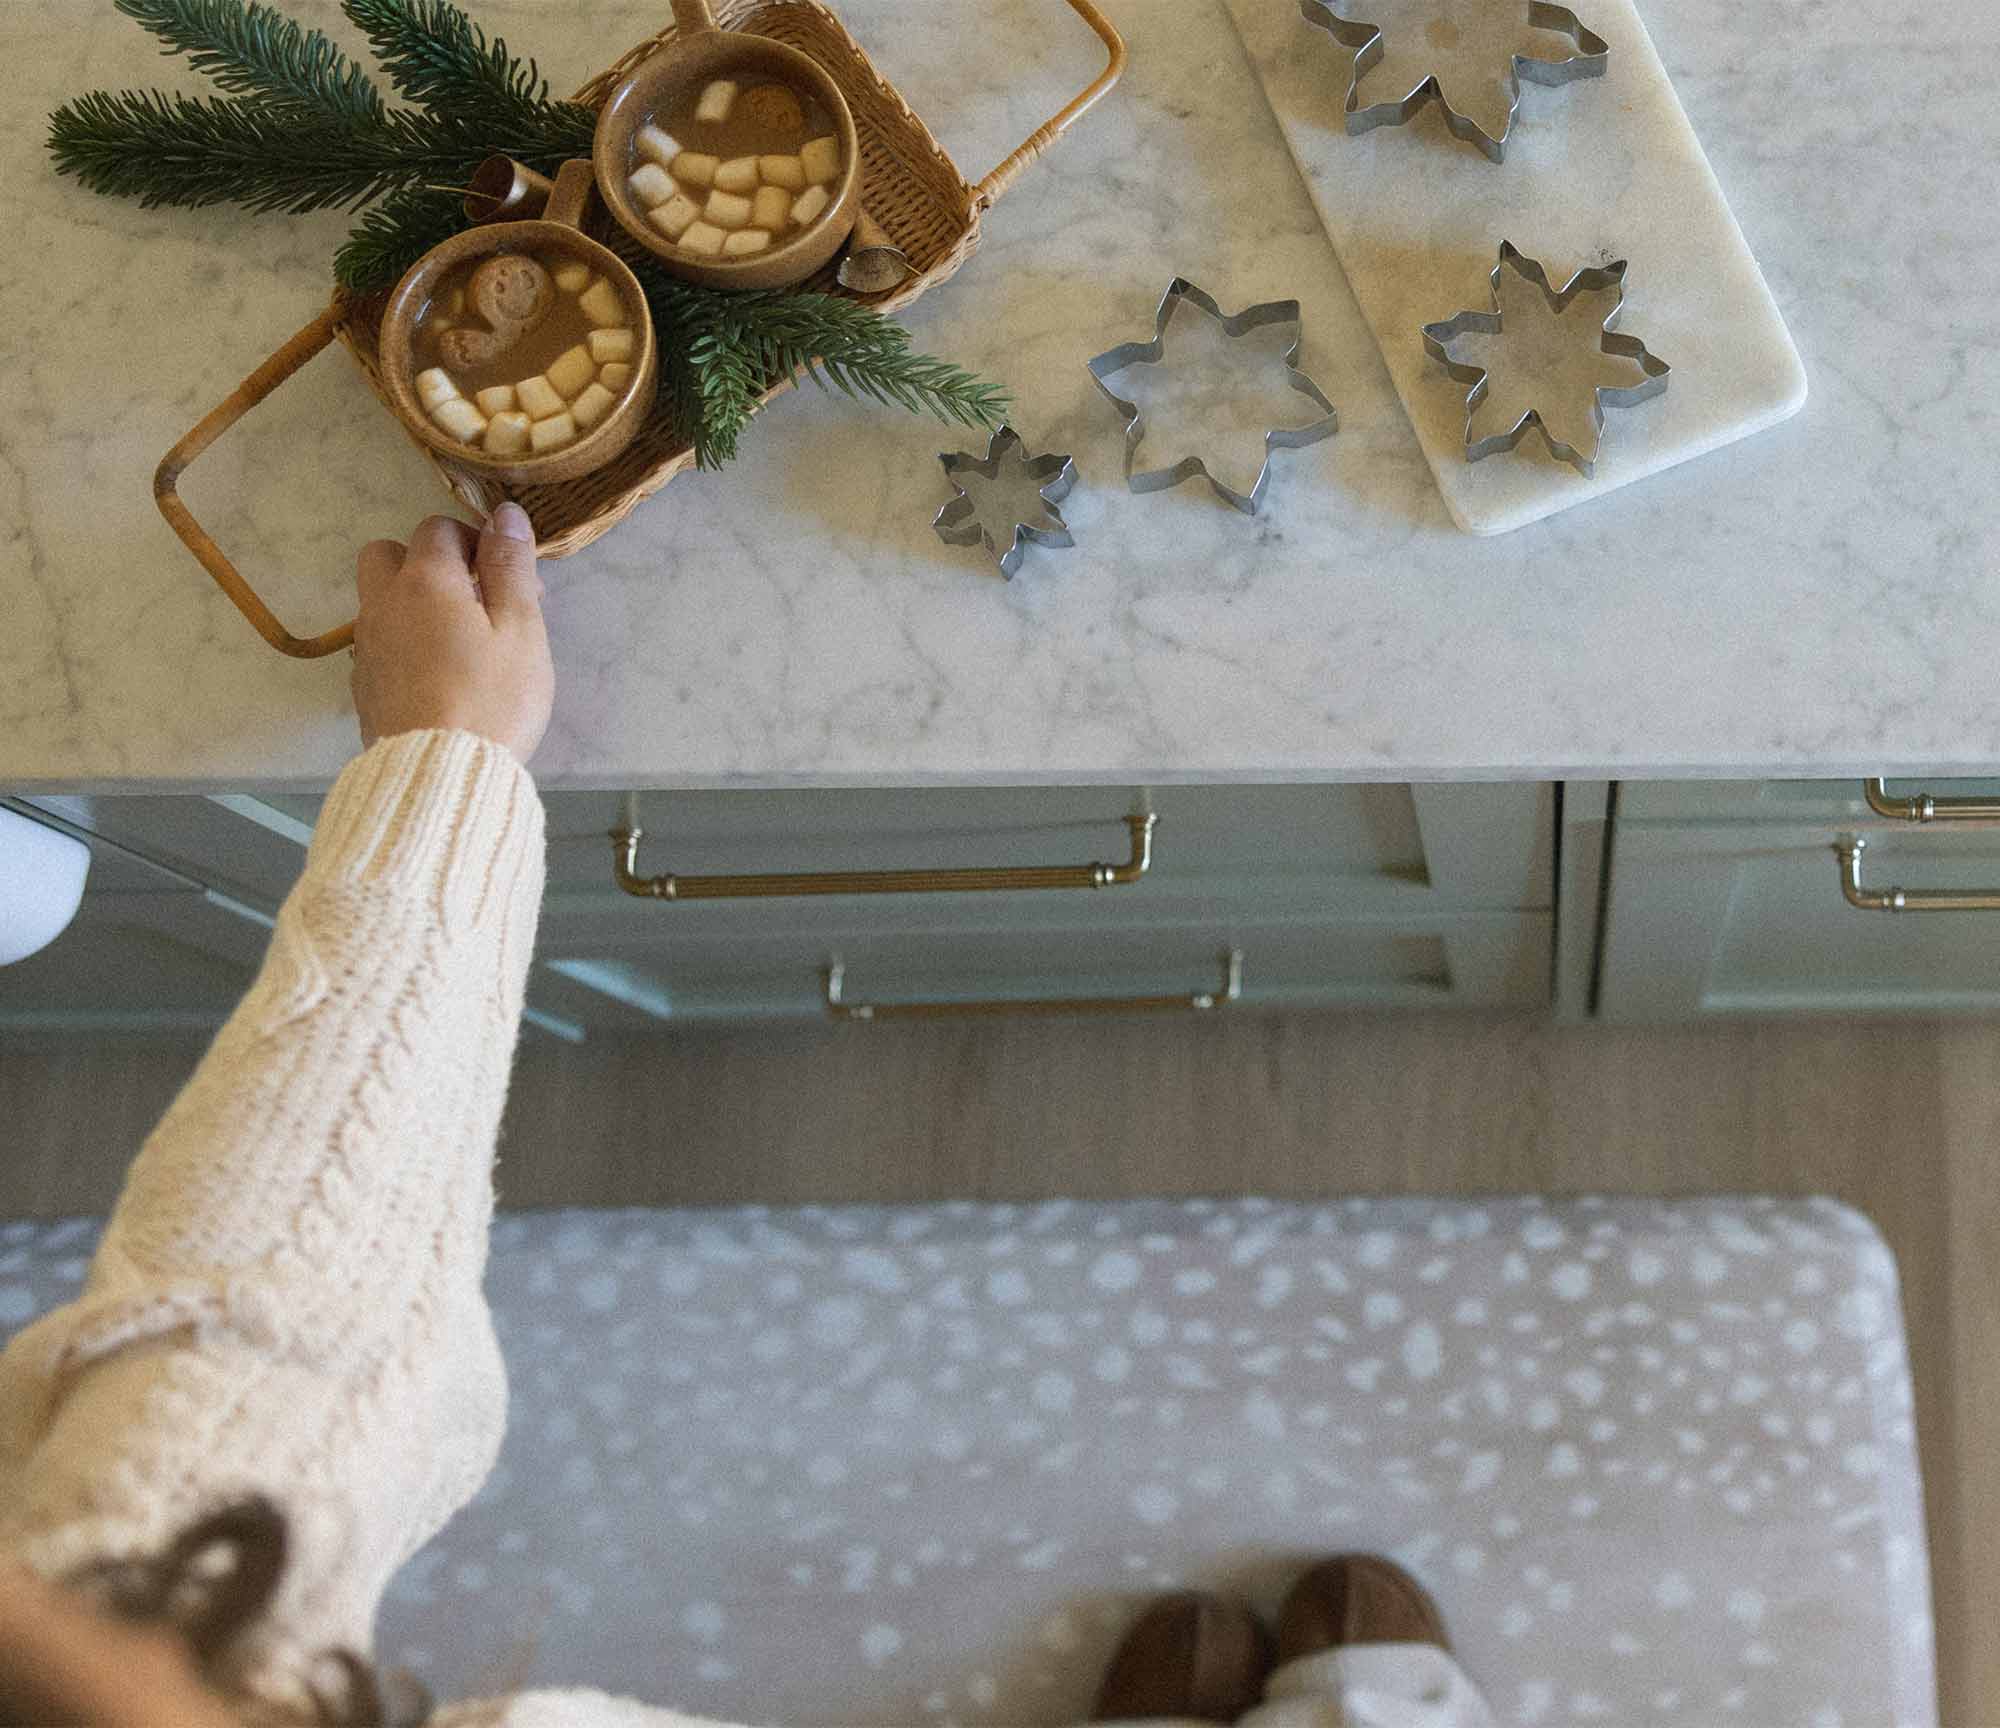 Fawn silver gray animal print kitchen mat shown in front of kitchen counter with woman reaching for cookie cutters and hot cocoa